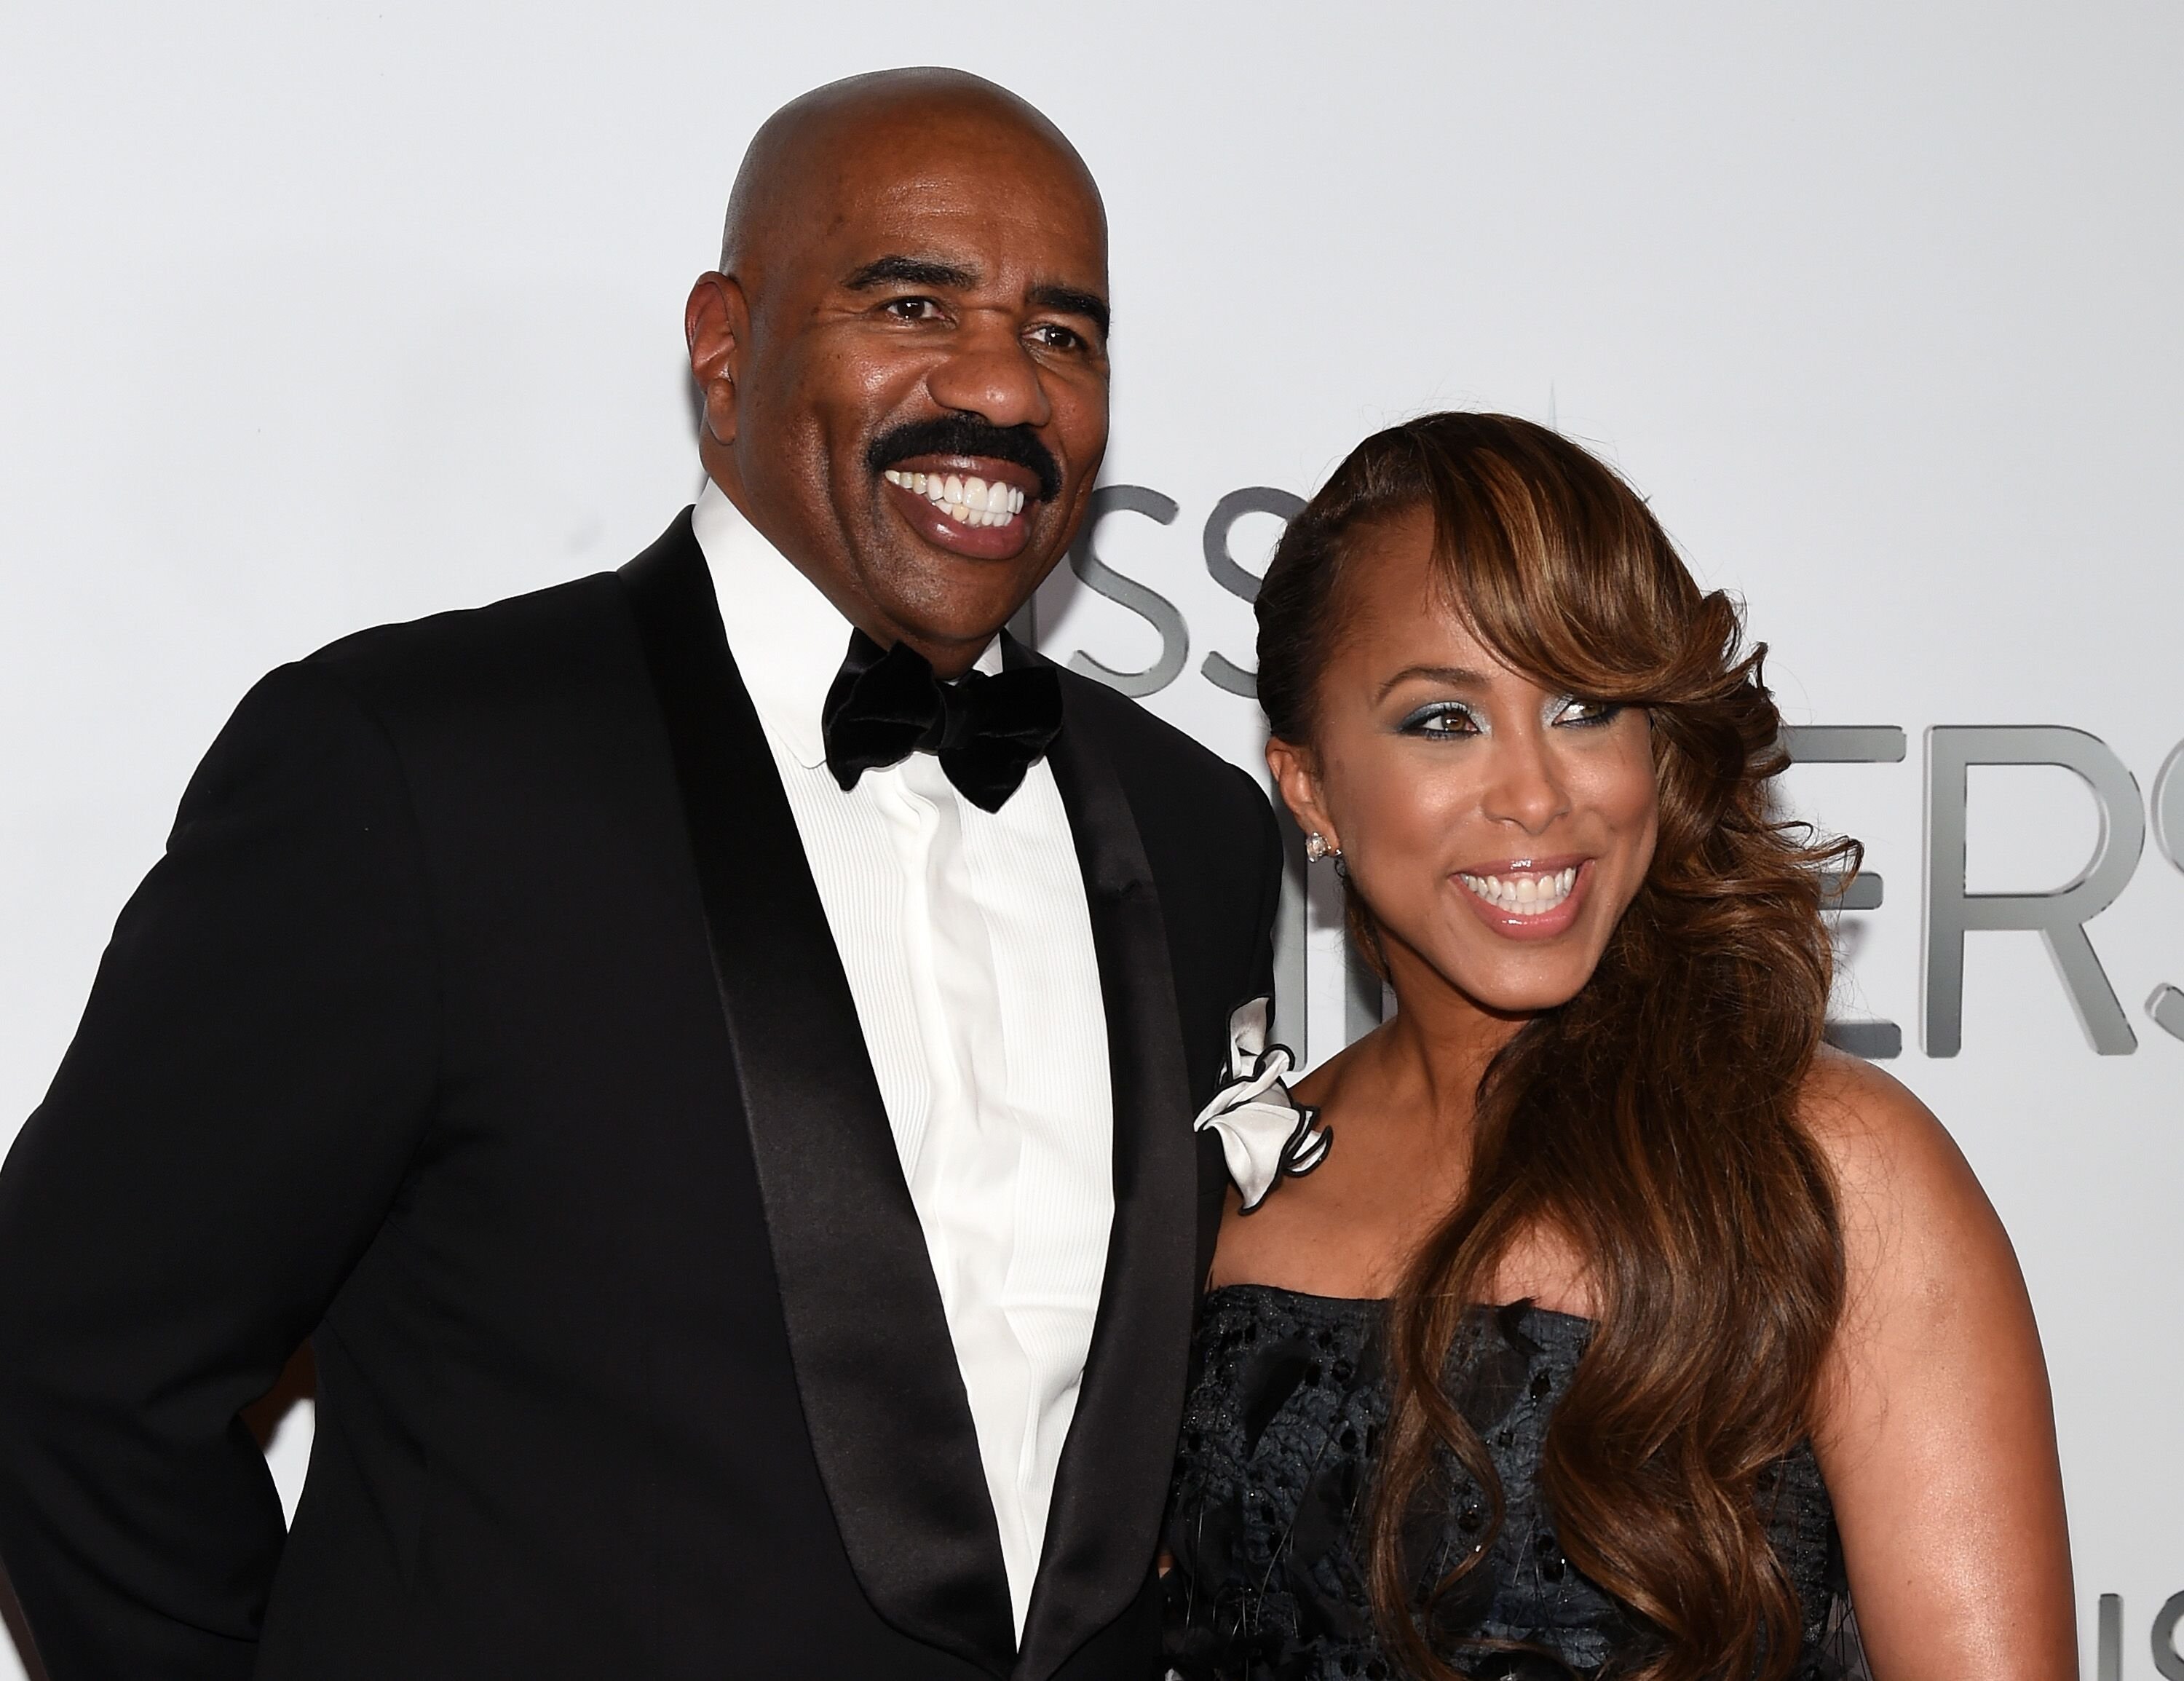 Steve Harvey and Marjorie Harvey at the Miss Universe Pageant/ Source: Getty Images